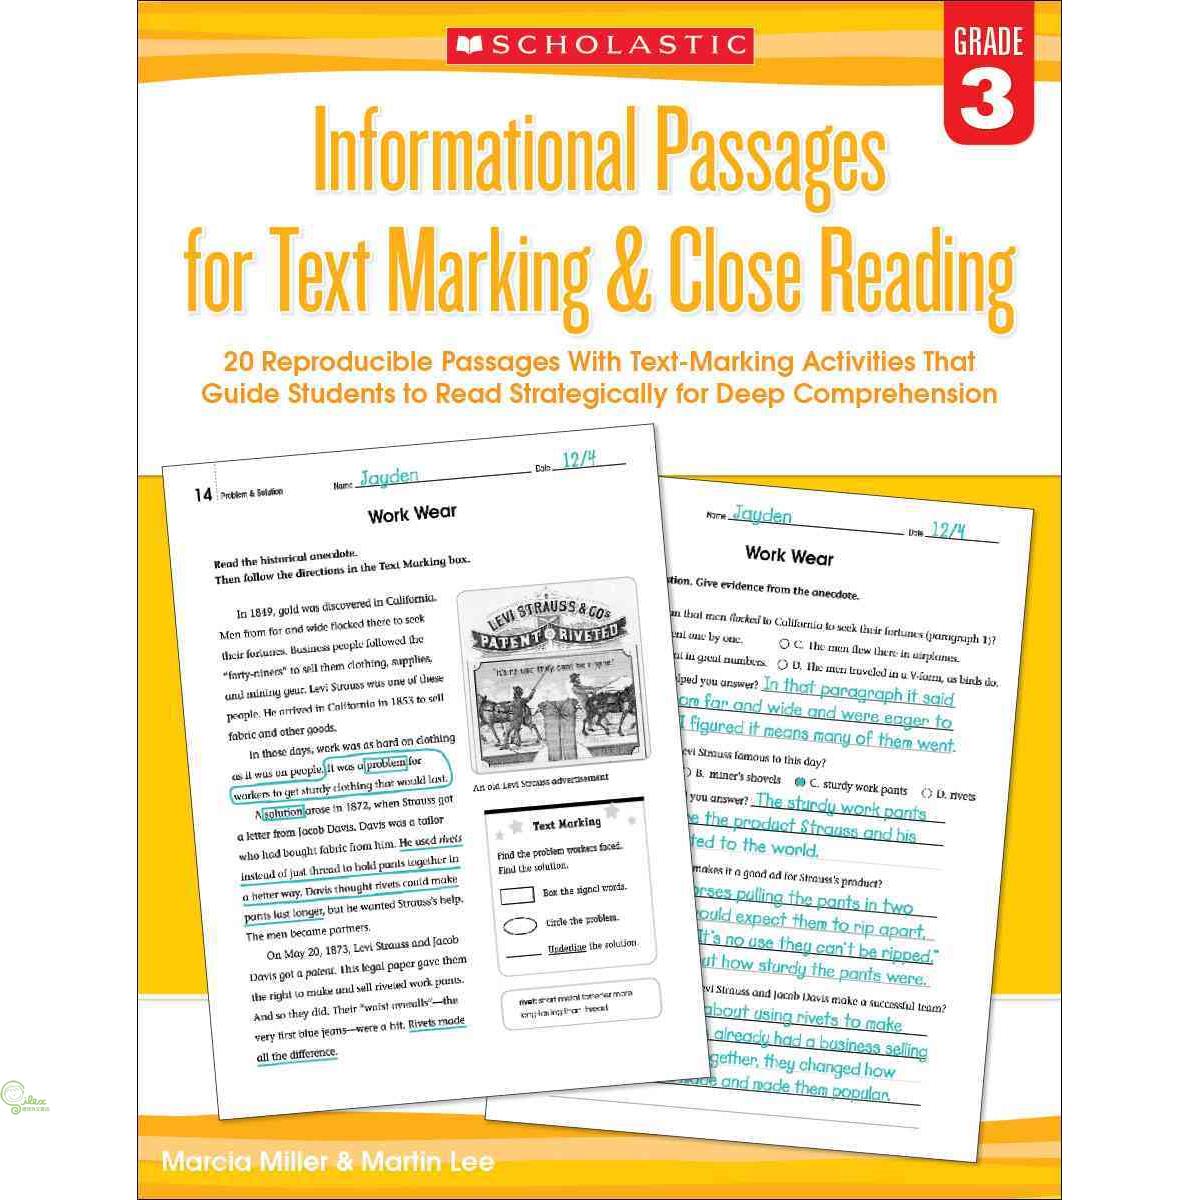 Informational Passages for Text Marking & Close Reading: Grade 3